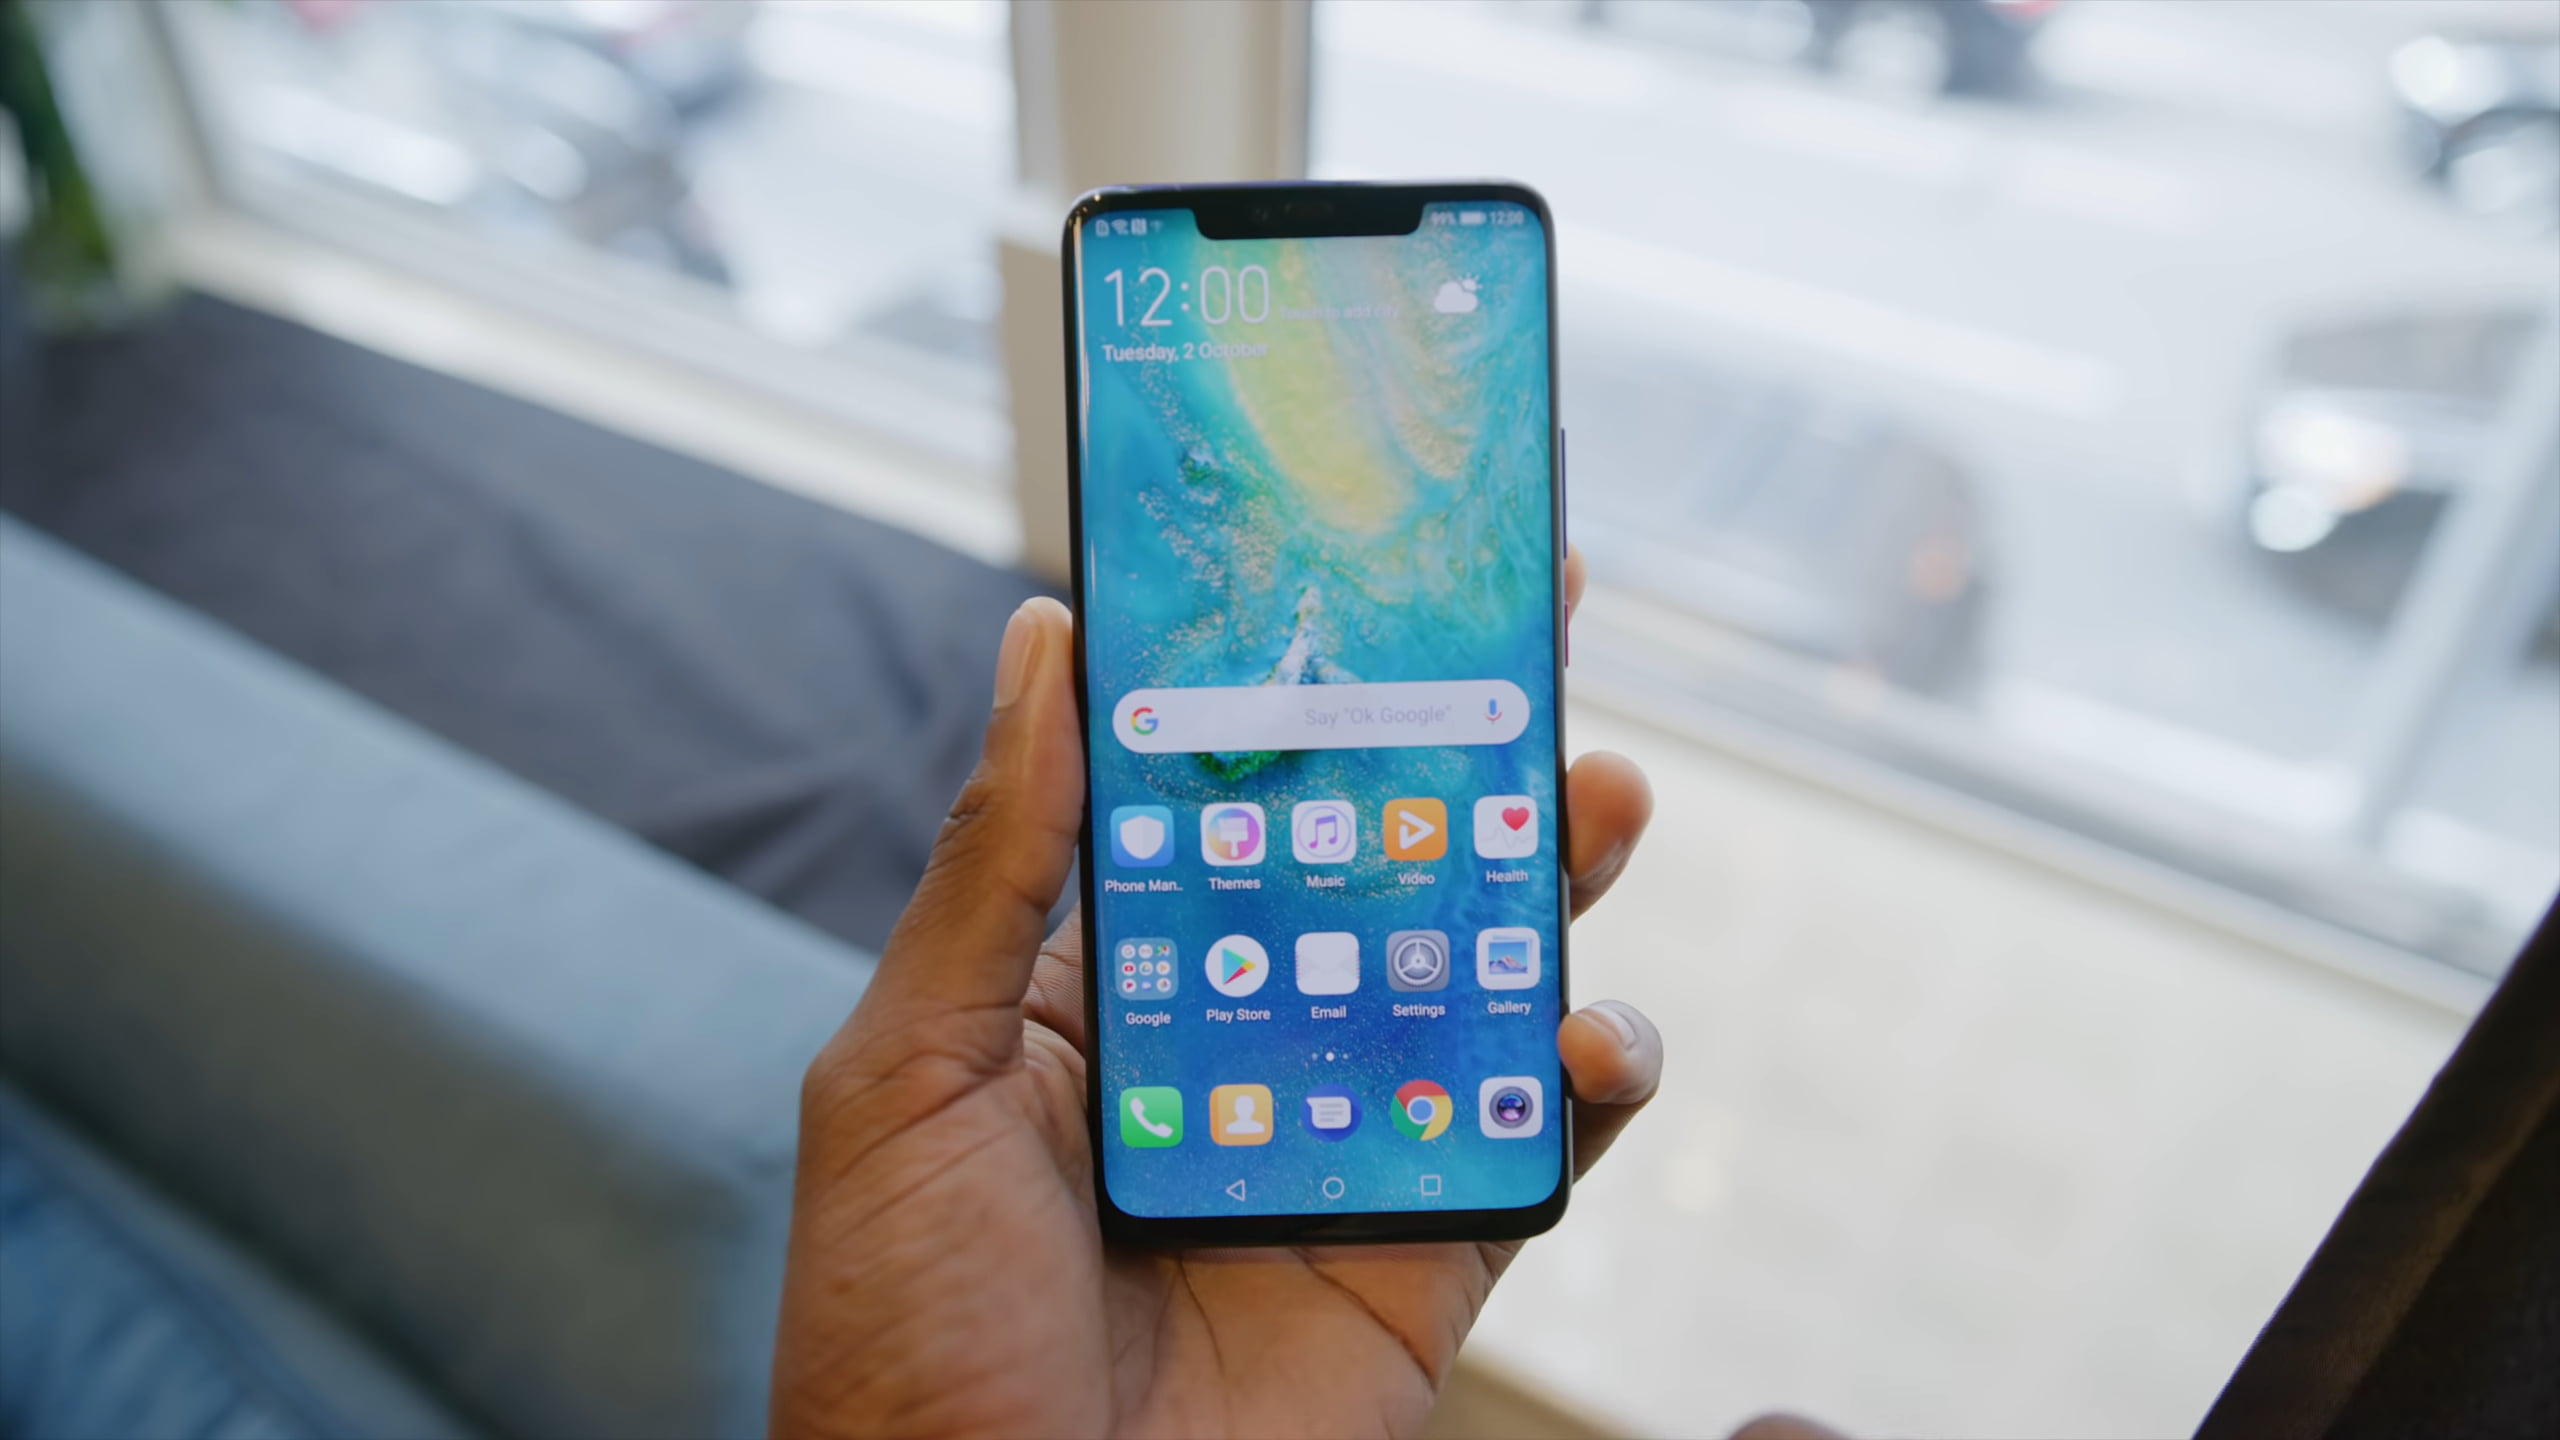 Huawei Mate 20 Pro Software Emui Android Pie 9.0